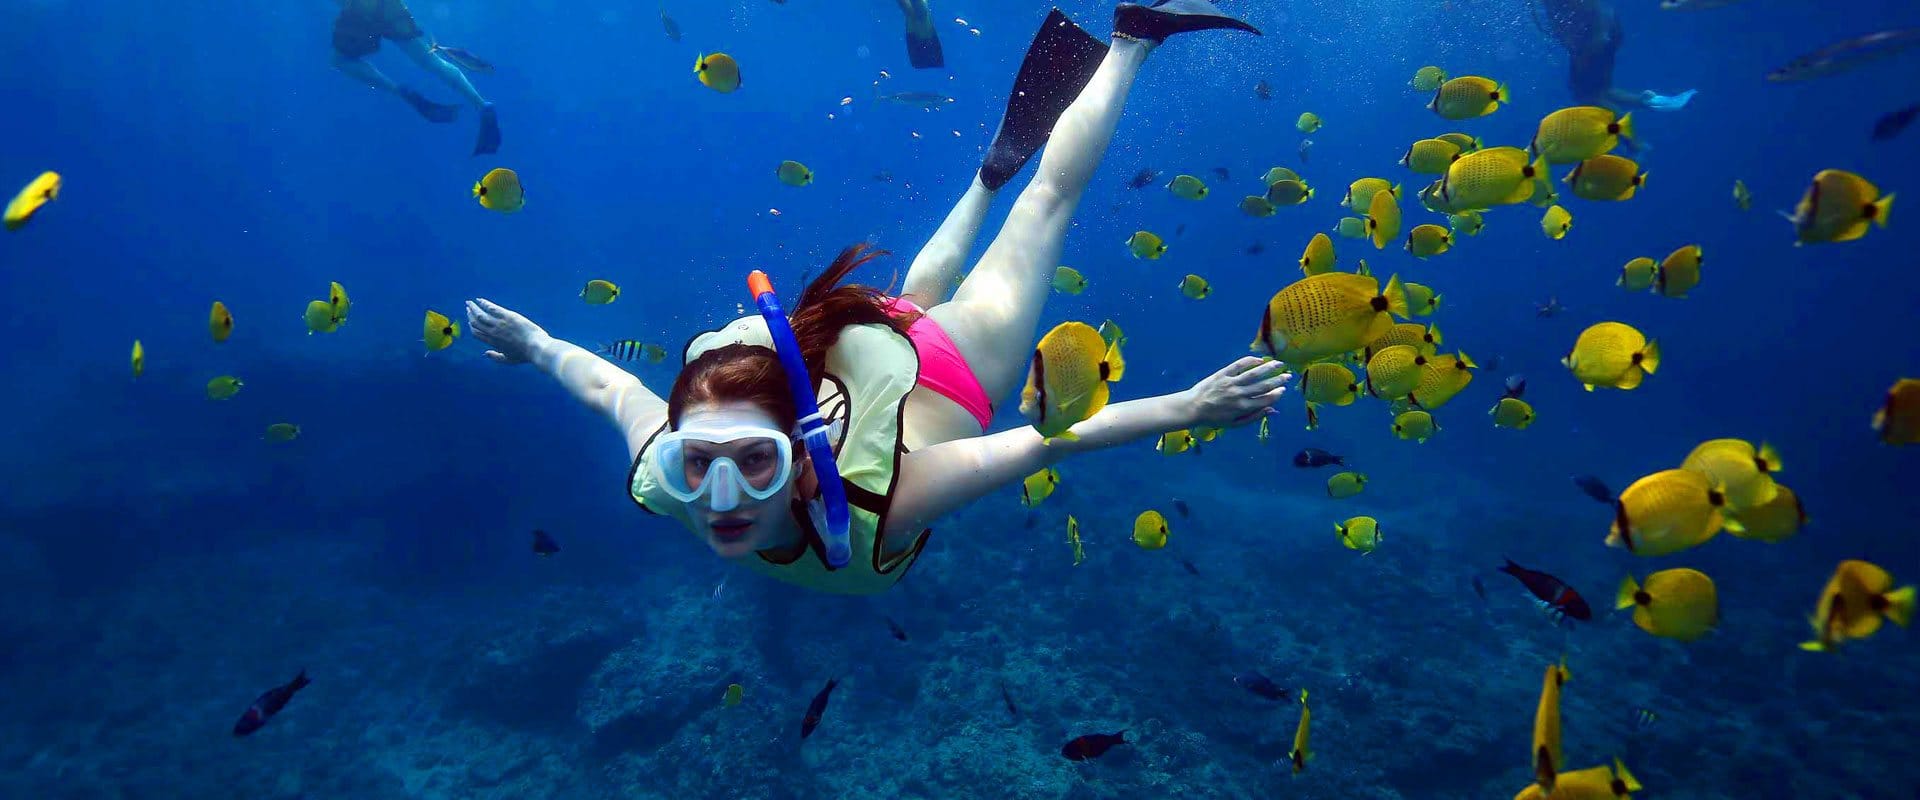 Snorkel Among Reef, Sea Turtles, and Tropical Fish